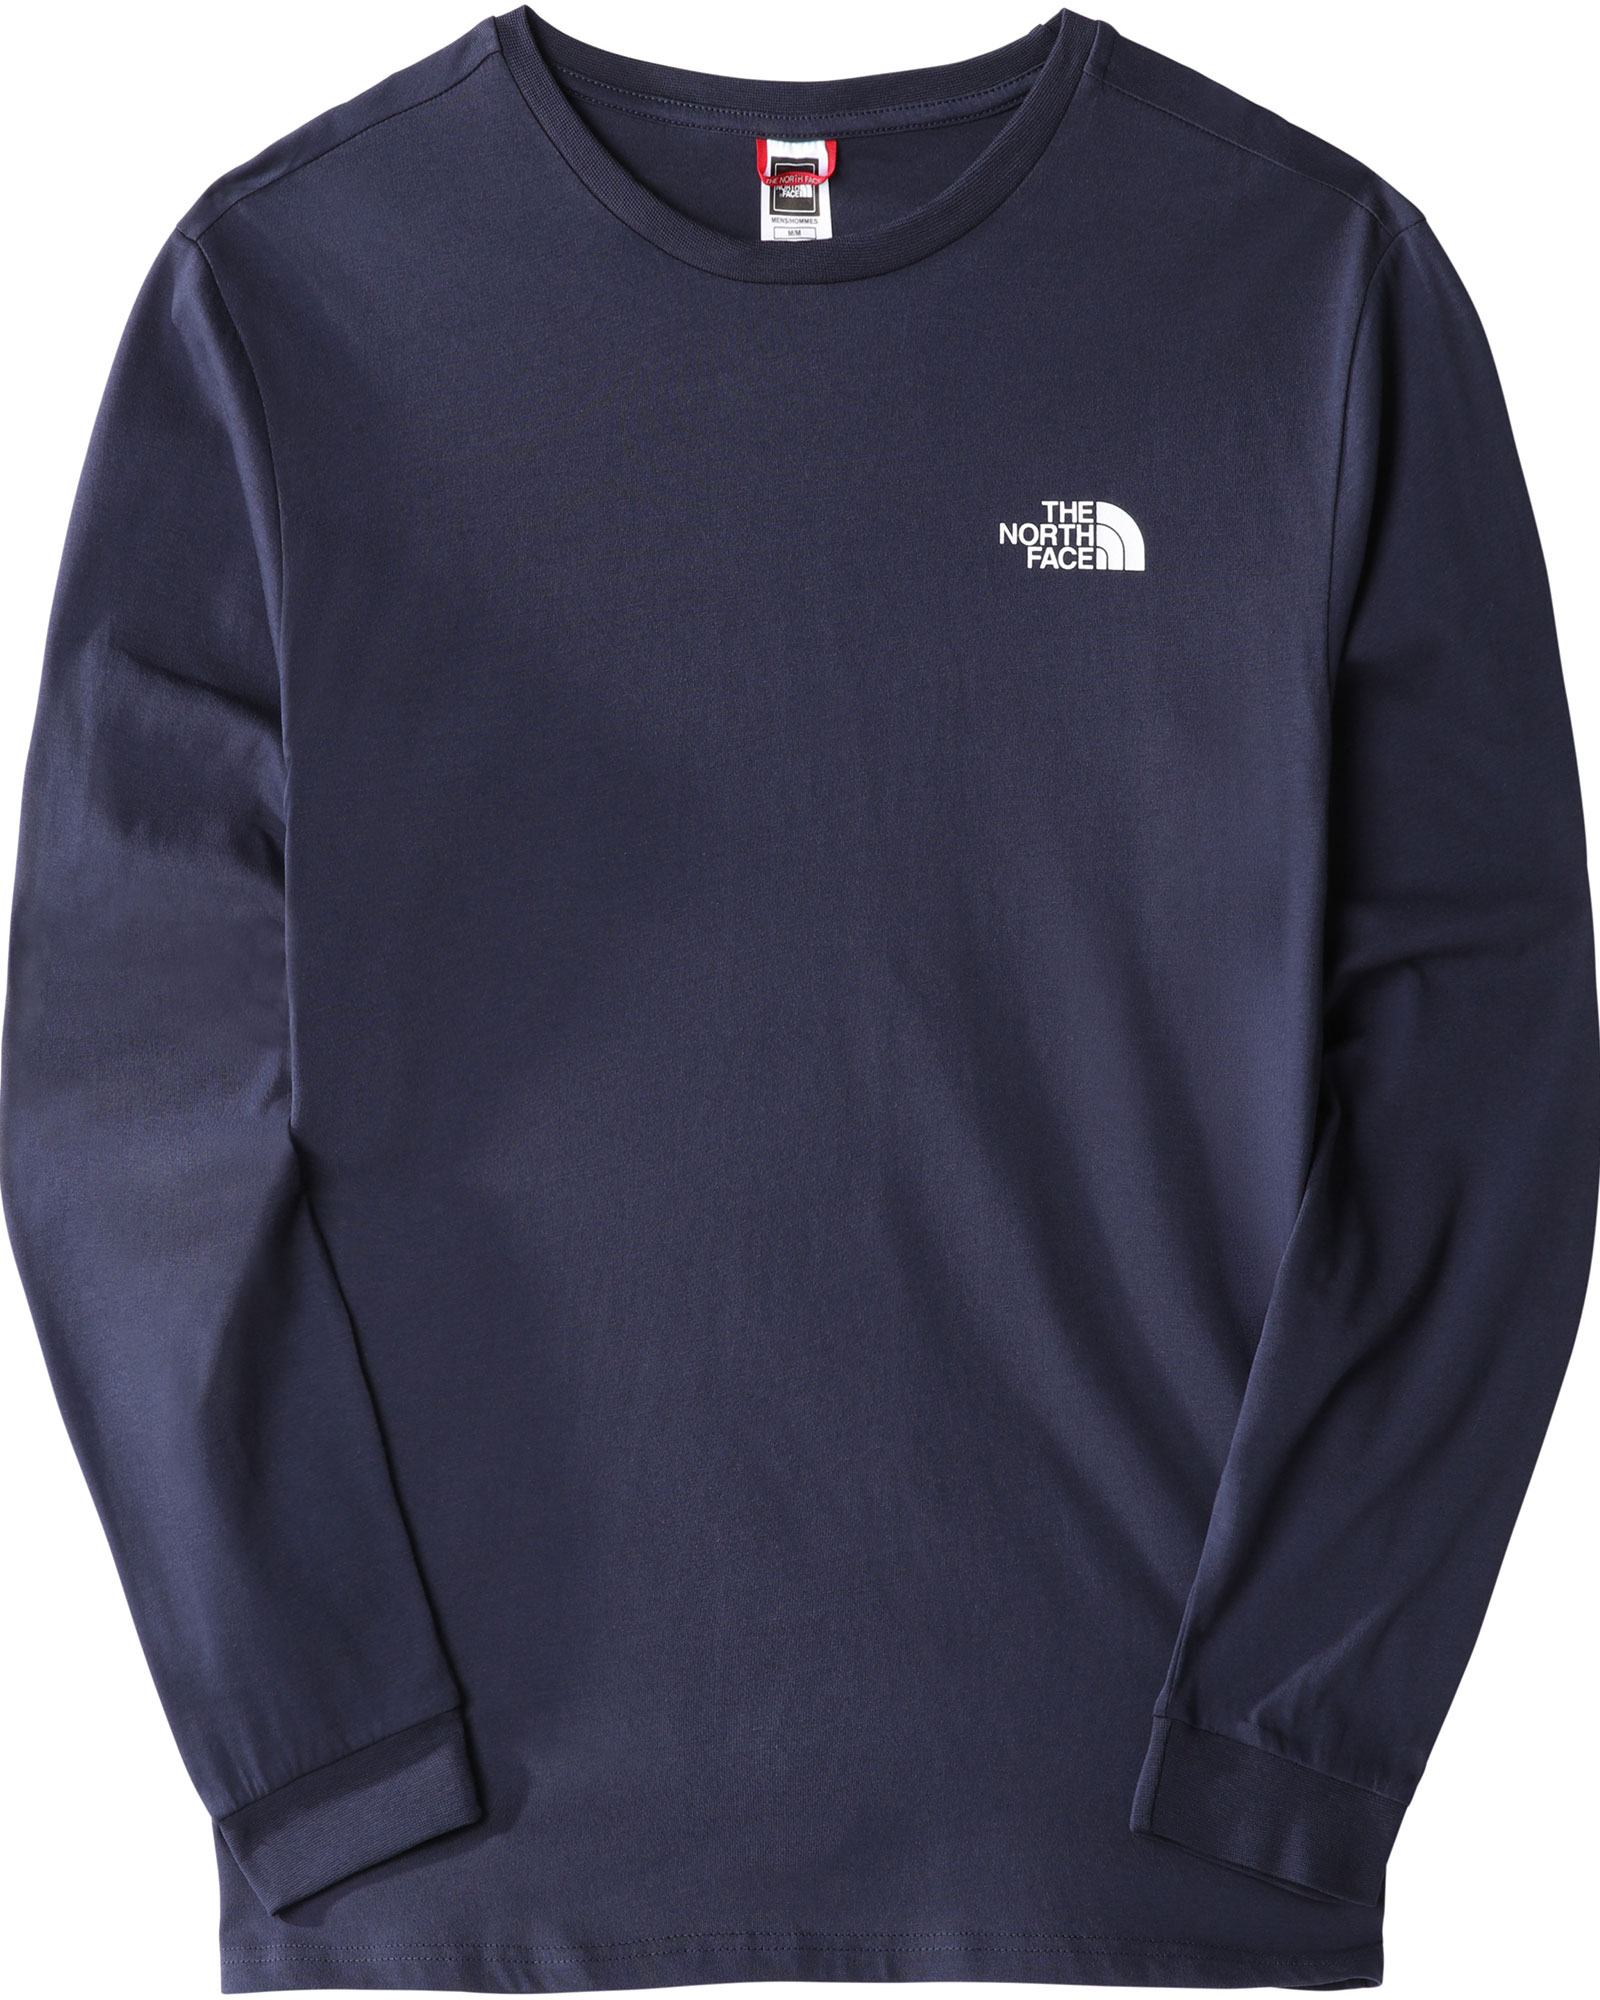 The North Face Simple Dome Men’s Long Sleeve T Shirt - Summit Navy S